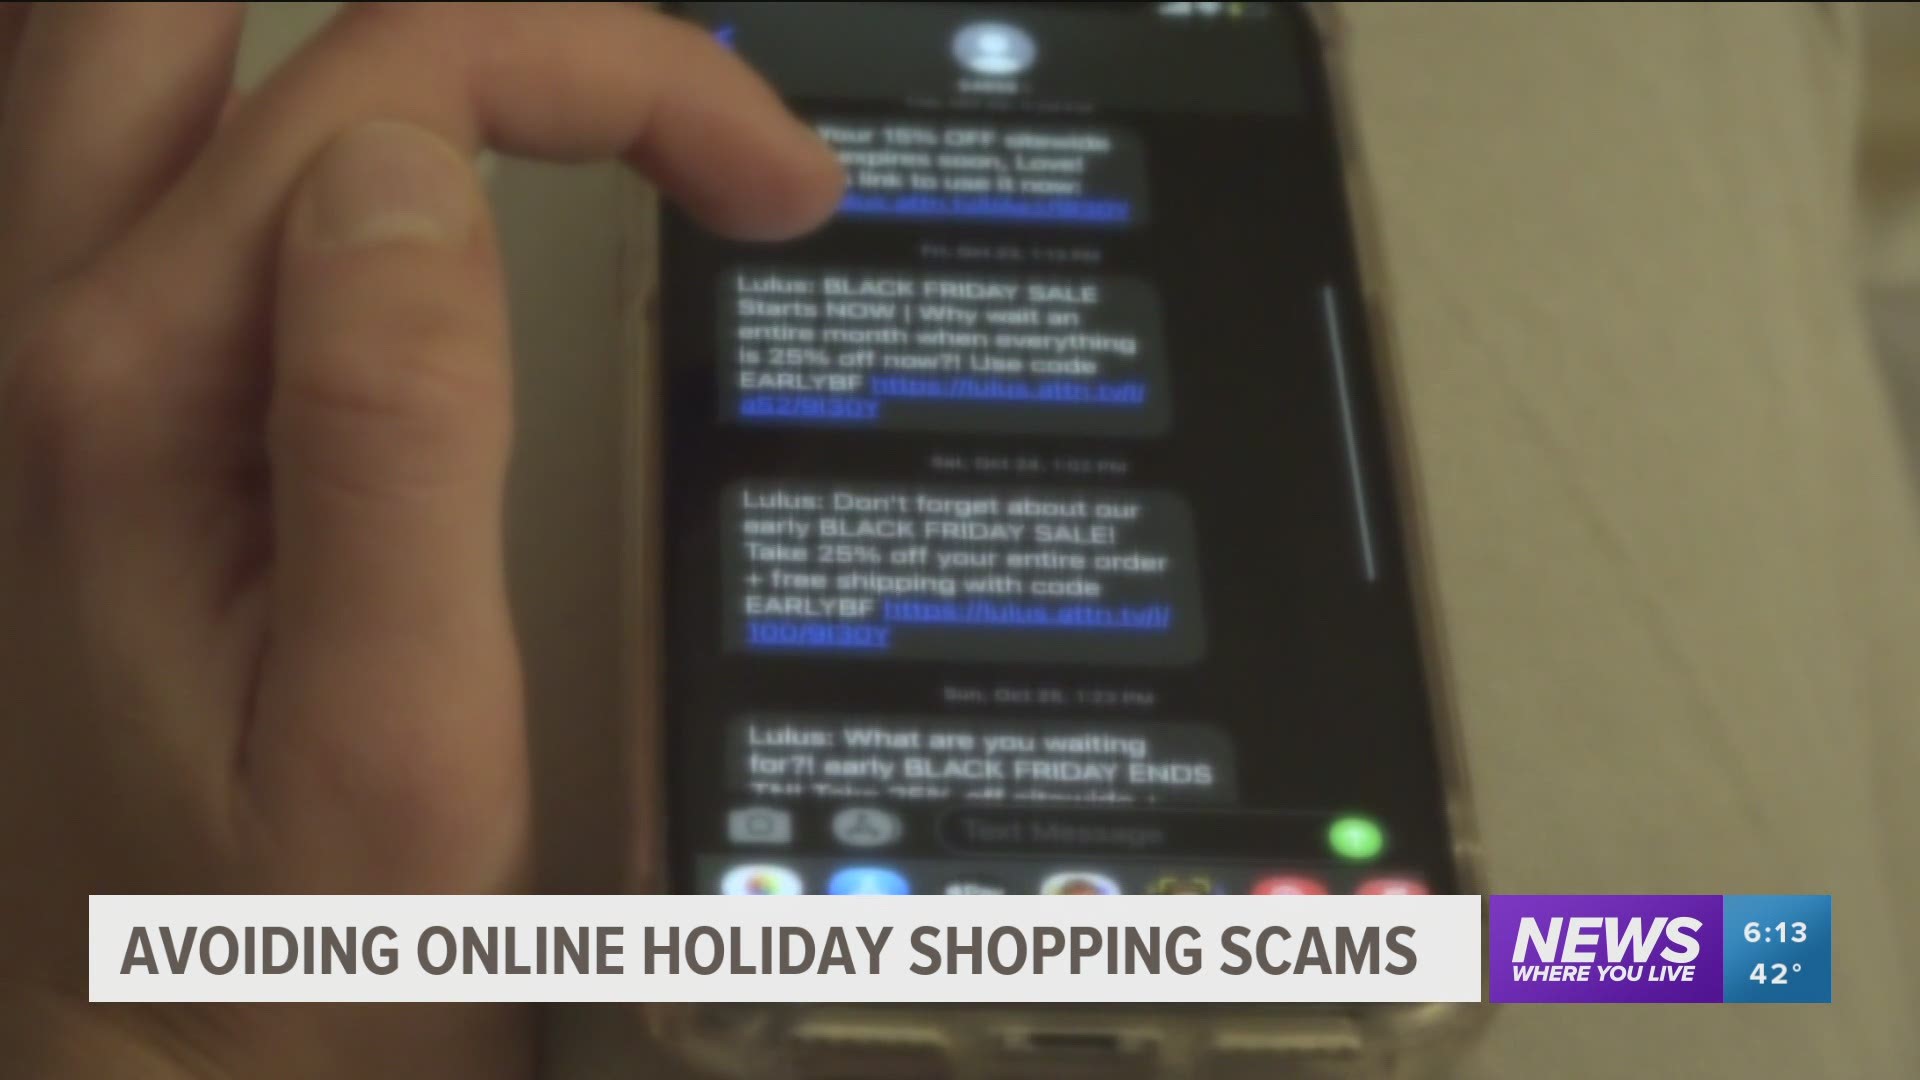 The Little Rock FBI is warning people to watch out for online scams this year as more look to online shopping amid the coronavirus pandemic.